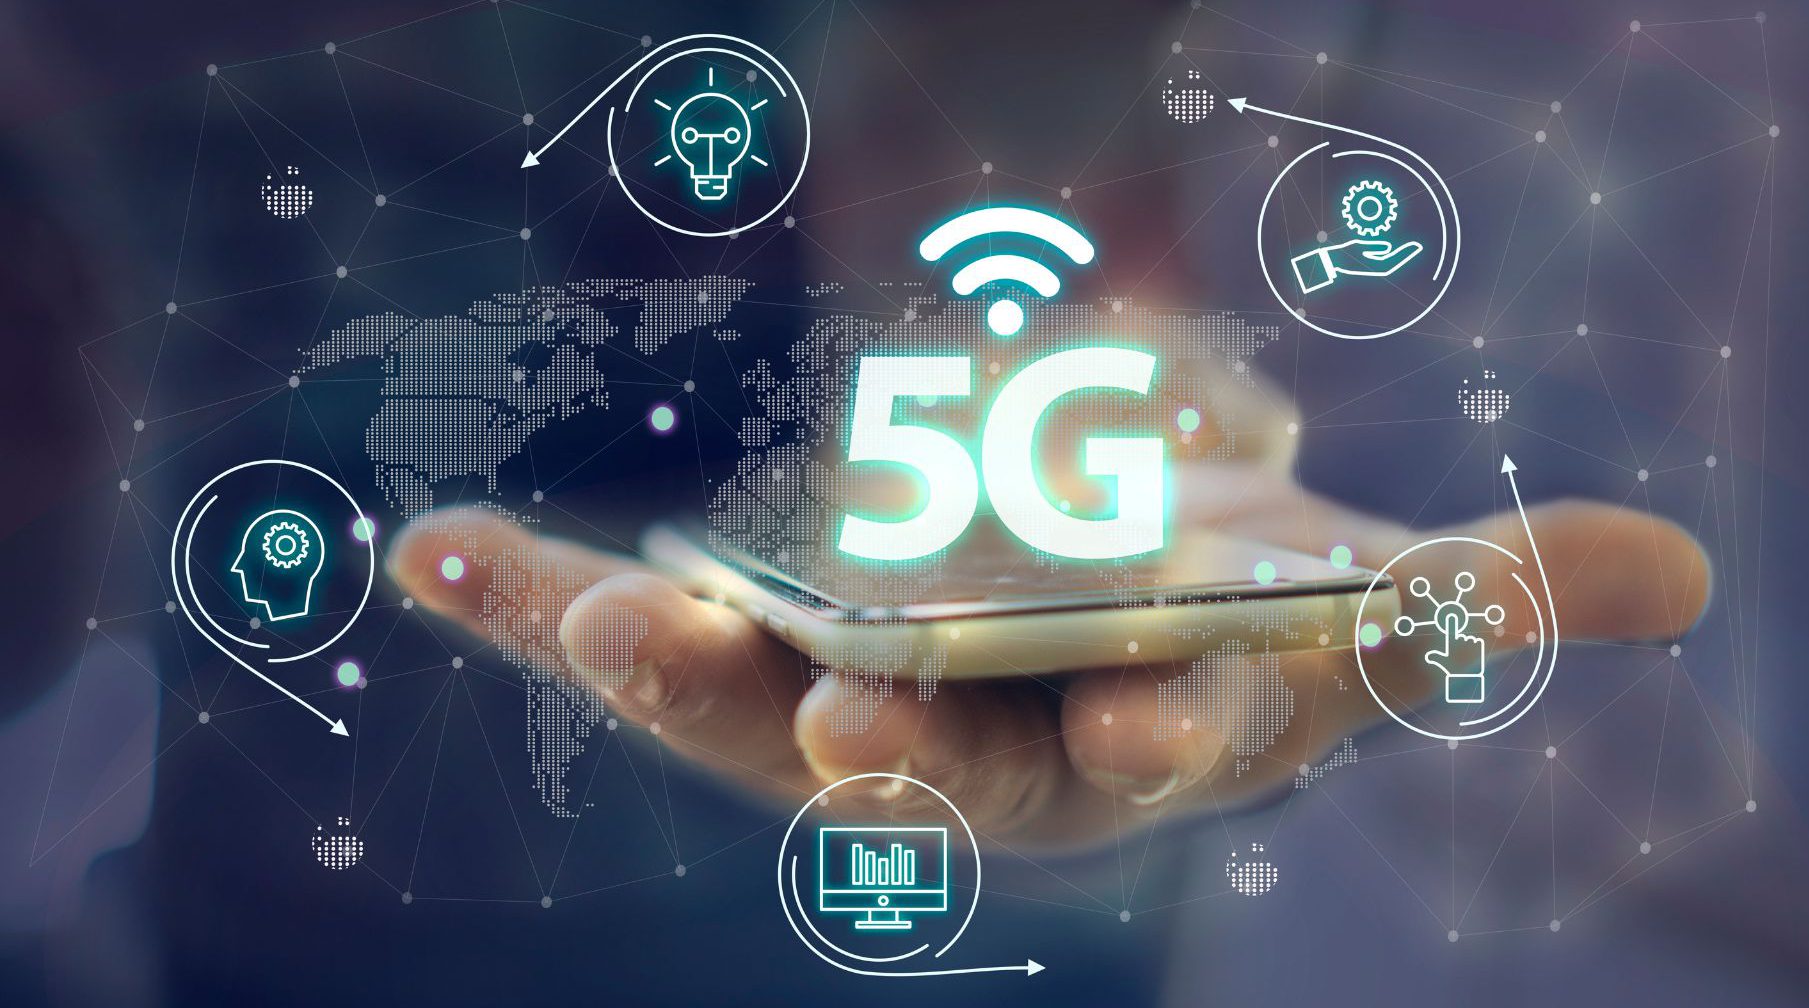 Take Up Global 5G Chipset Market Opportunities with Clear Industry Data – Includes 5G Chipset Market Size